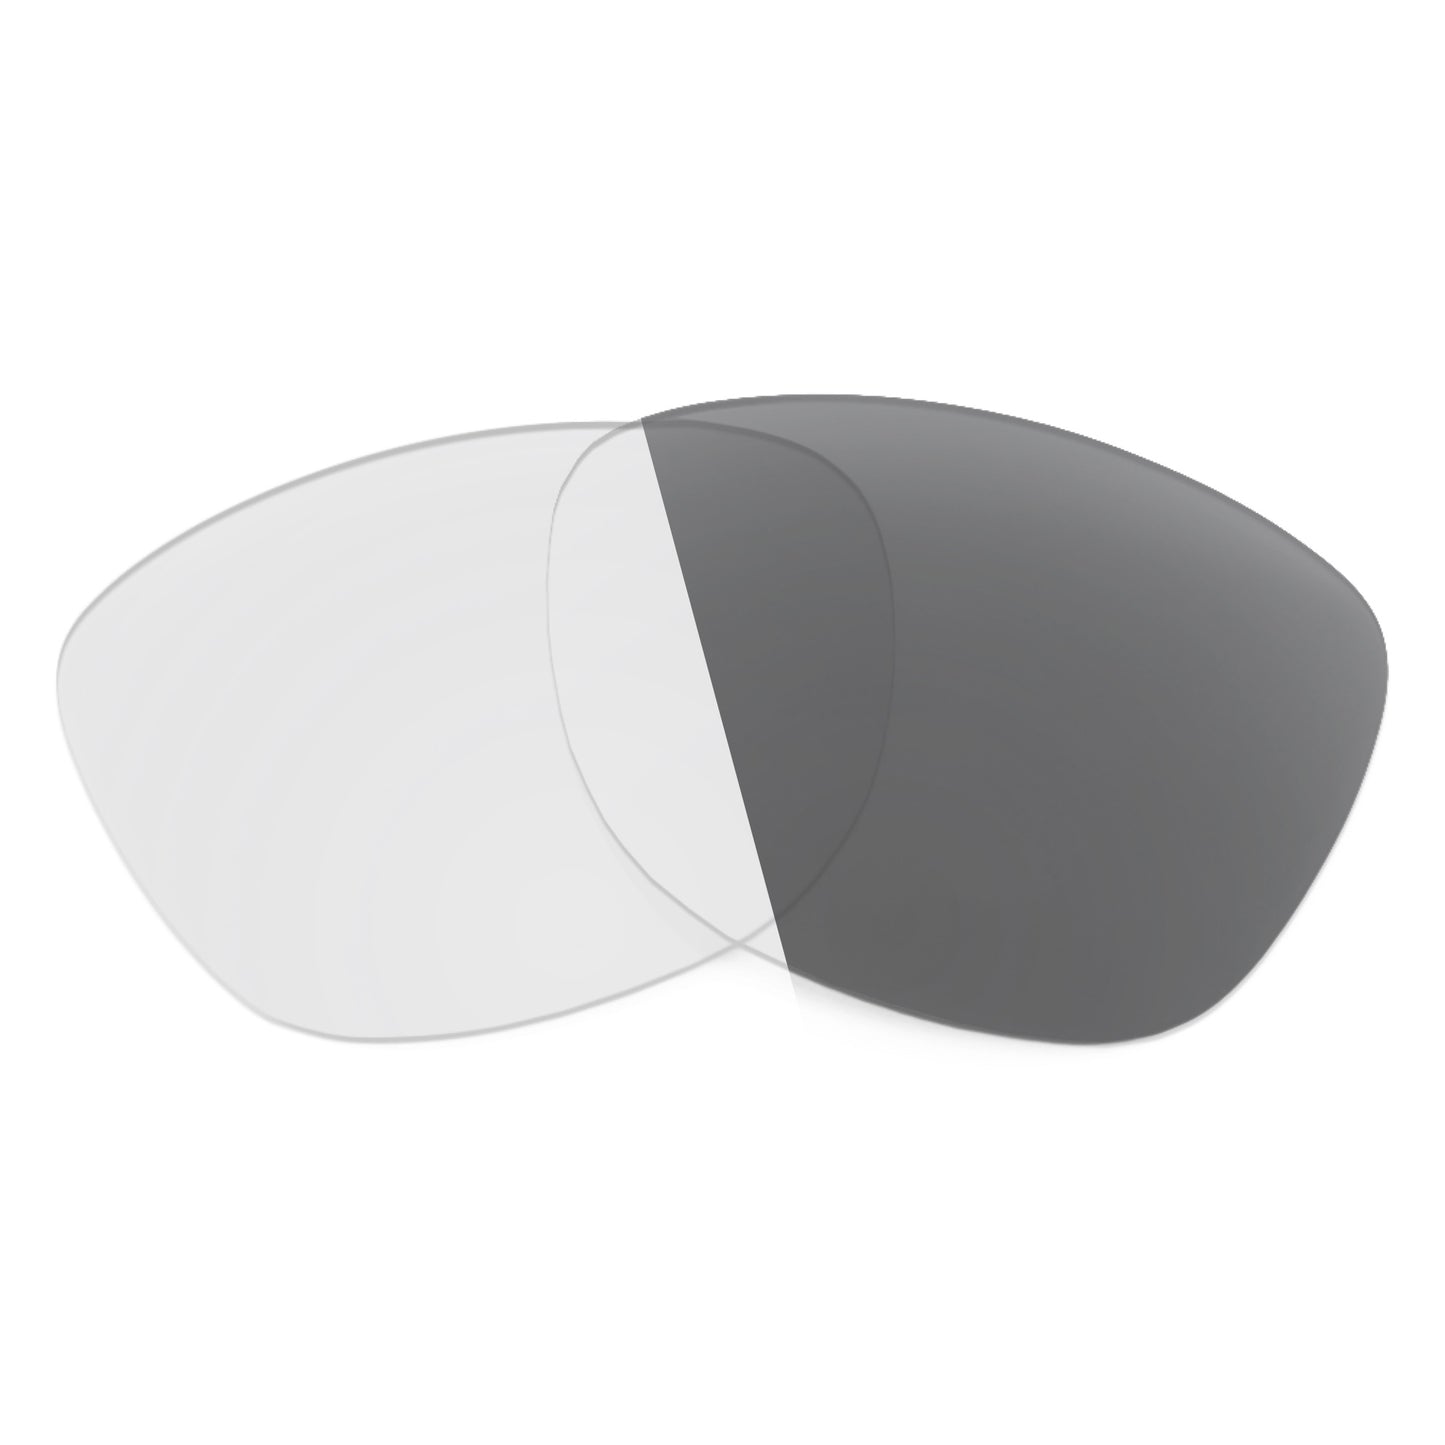 Revant replacement lenses for Ray-Ban Stories Meteor RW4005 51mm Non-Polarized Adapt Gray Photochromic